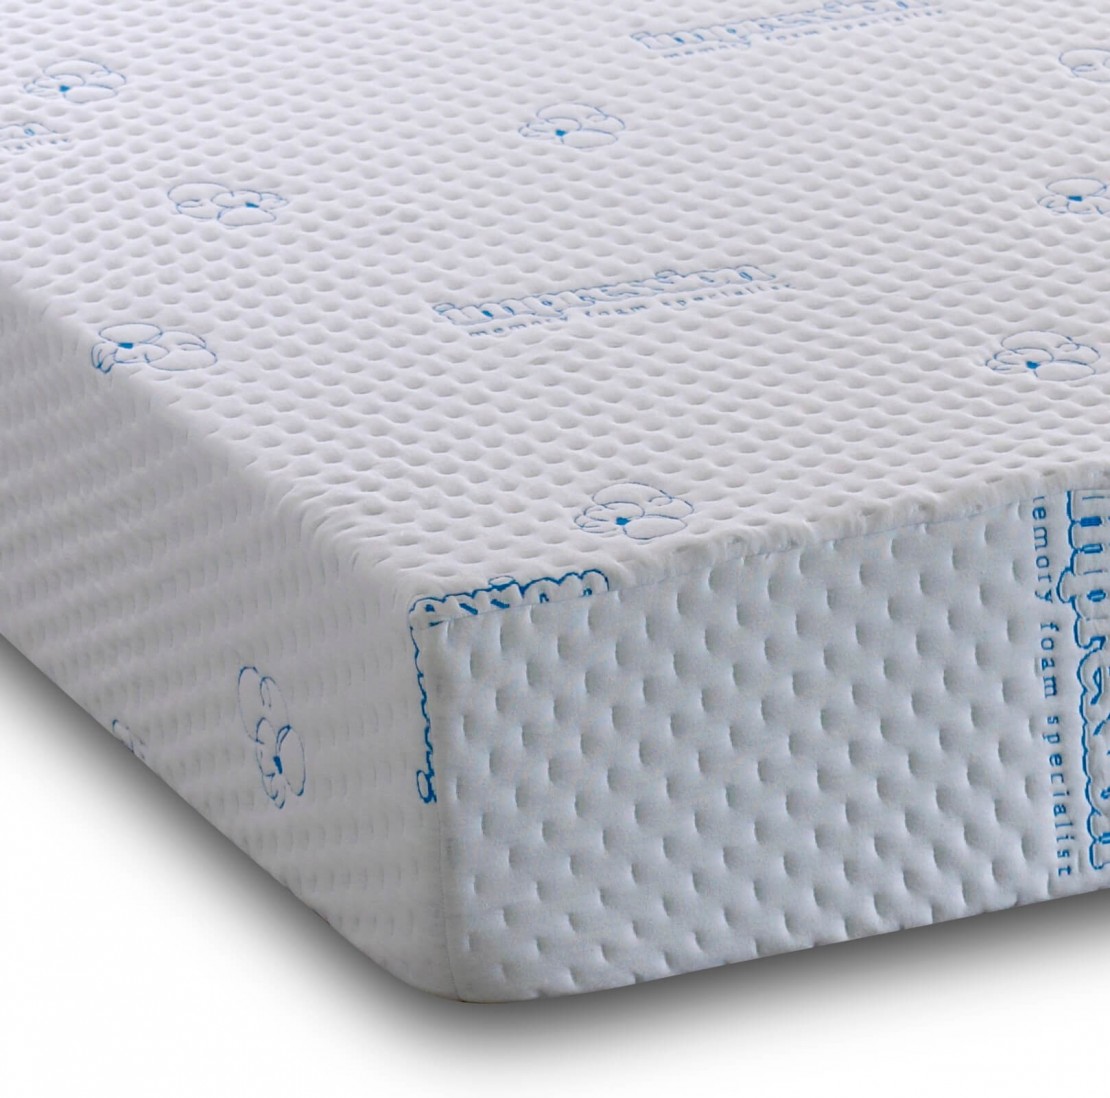 /_images/product-photos/visco-therapy-visco-2000-hd-memory-foam-firm-mattress-a.jpg